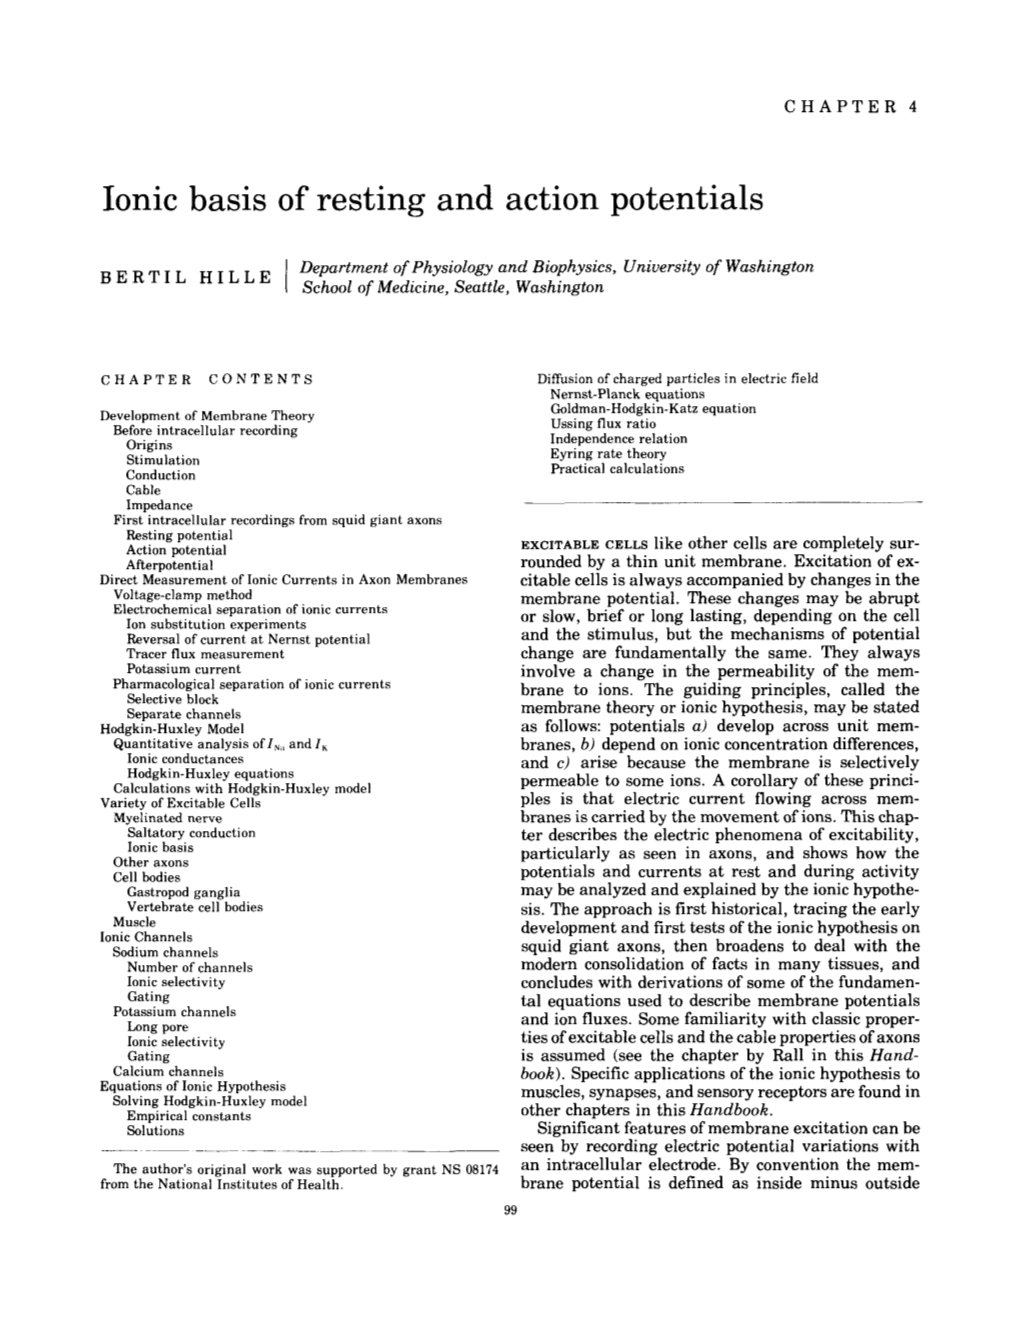 Ionic Basis of Resting and Action Potentials. In: Comprehensive